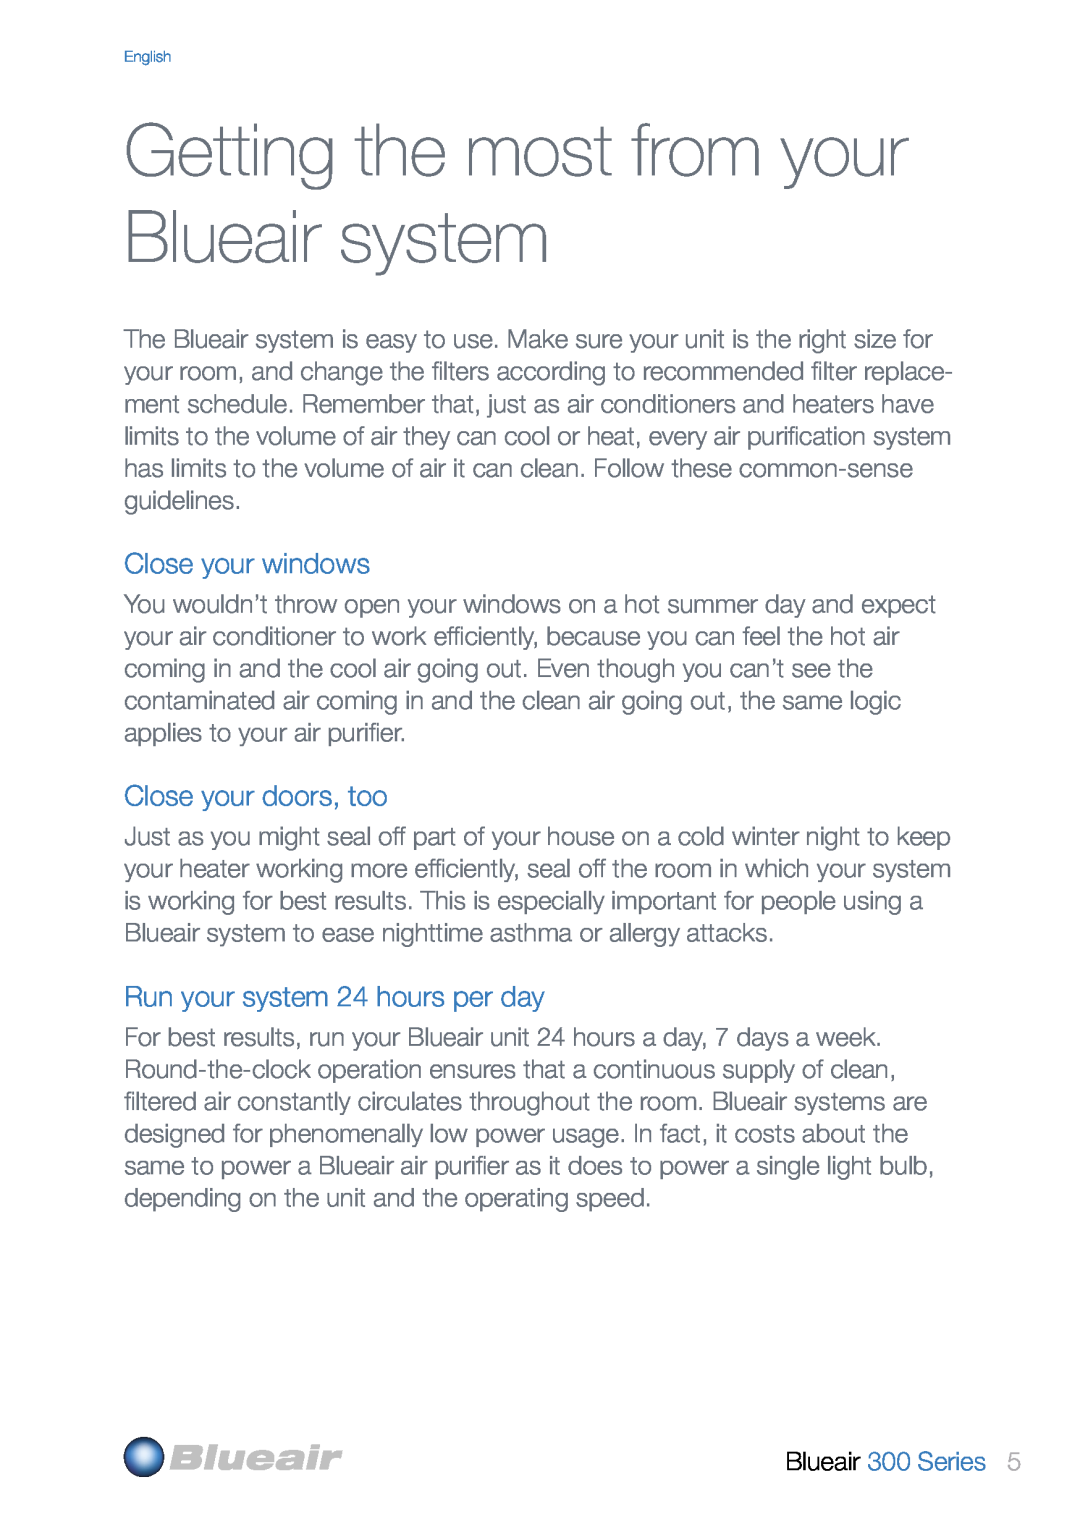 Blueair Getting the most from your Blueair system, Close your windows, Close your doors, too, Blueair 300 Series 